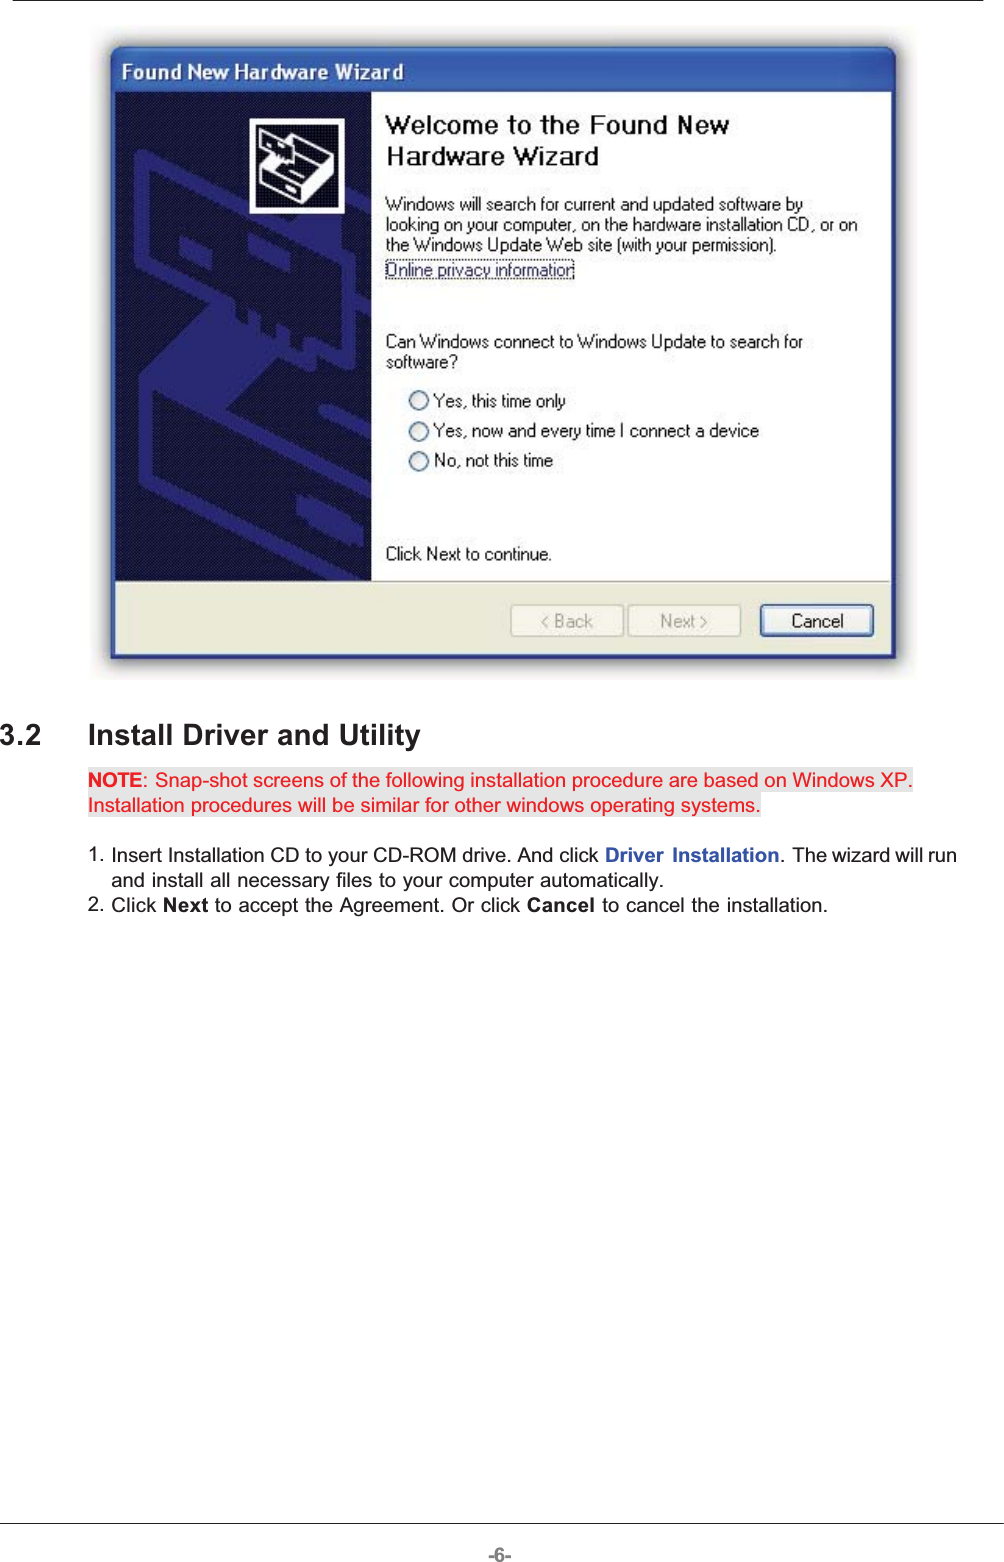 -6-3.2 Install Driver and UtilityNOTE: Snap-shot screens of the following installation procedure are based on Windows XP.Installation procedures will be similar for other windows operating systems.1. Insert Installation CD to your CD-ROM drive. And click Driver Installation. The wizard will runand install all necessary files to your computer automatically.2. Click Next to accept the Agreement. Or click Cancel to cancel the installation.